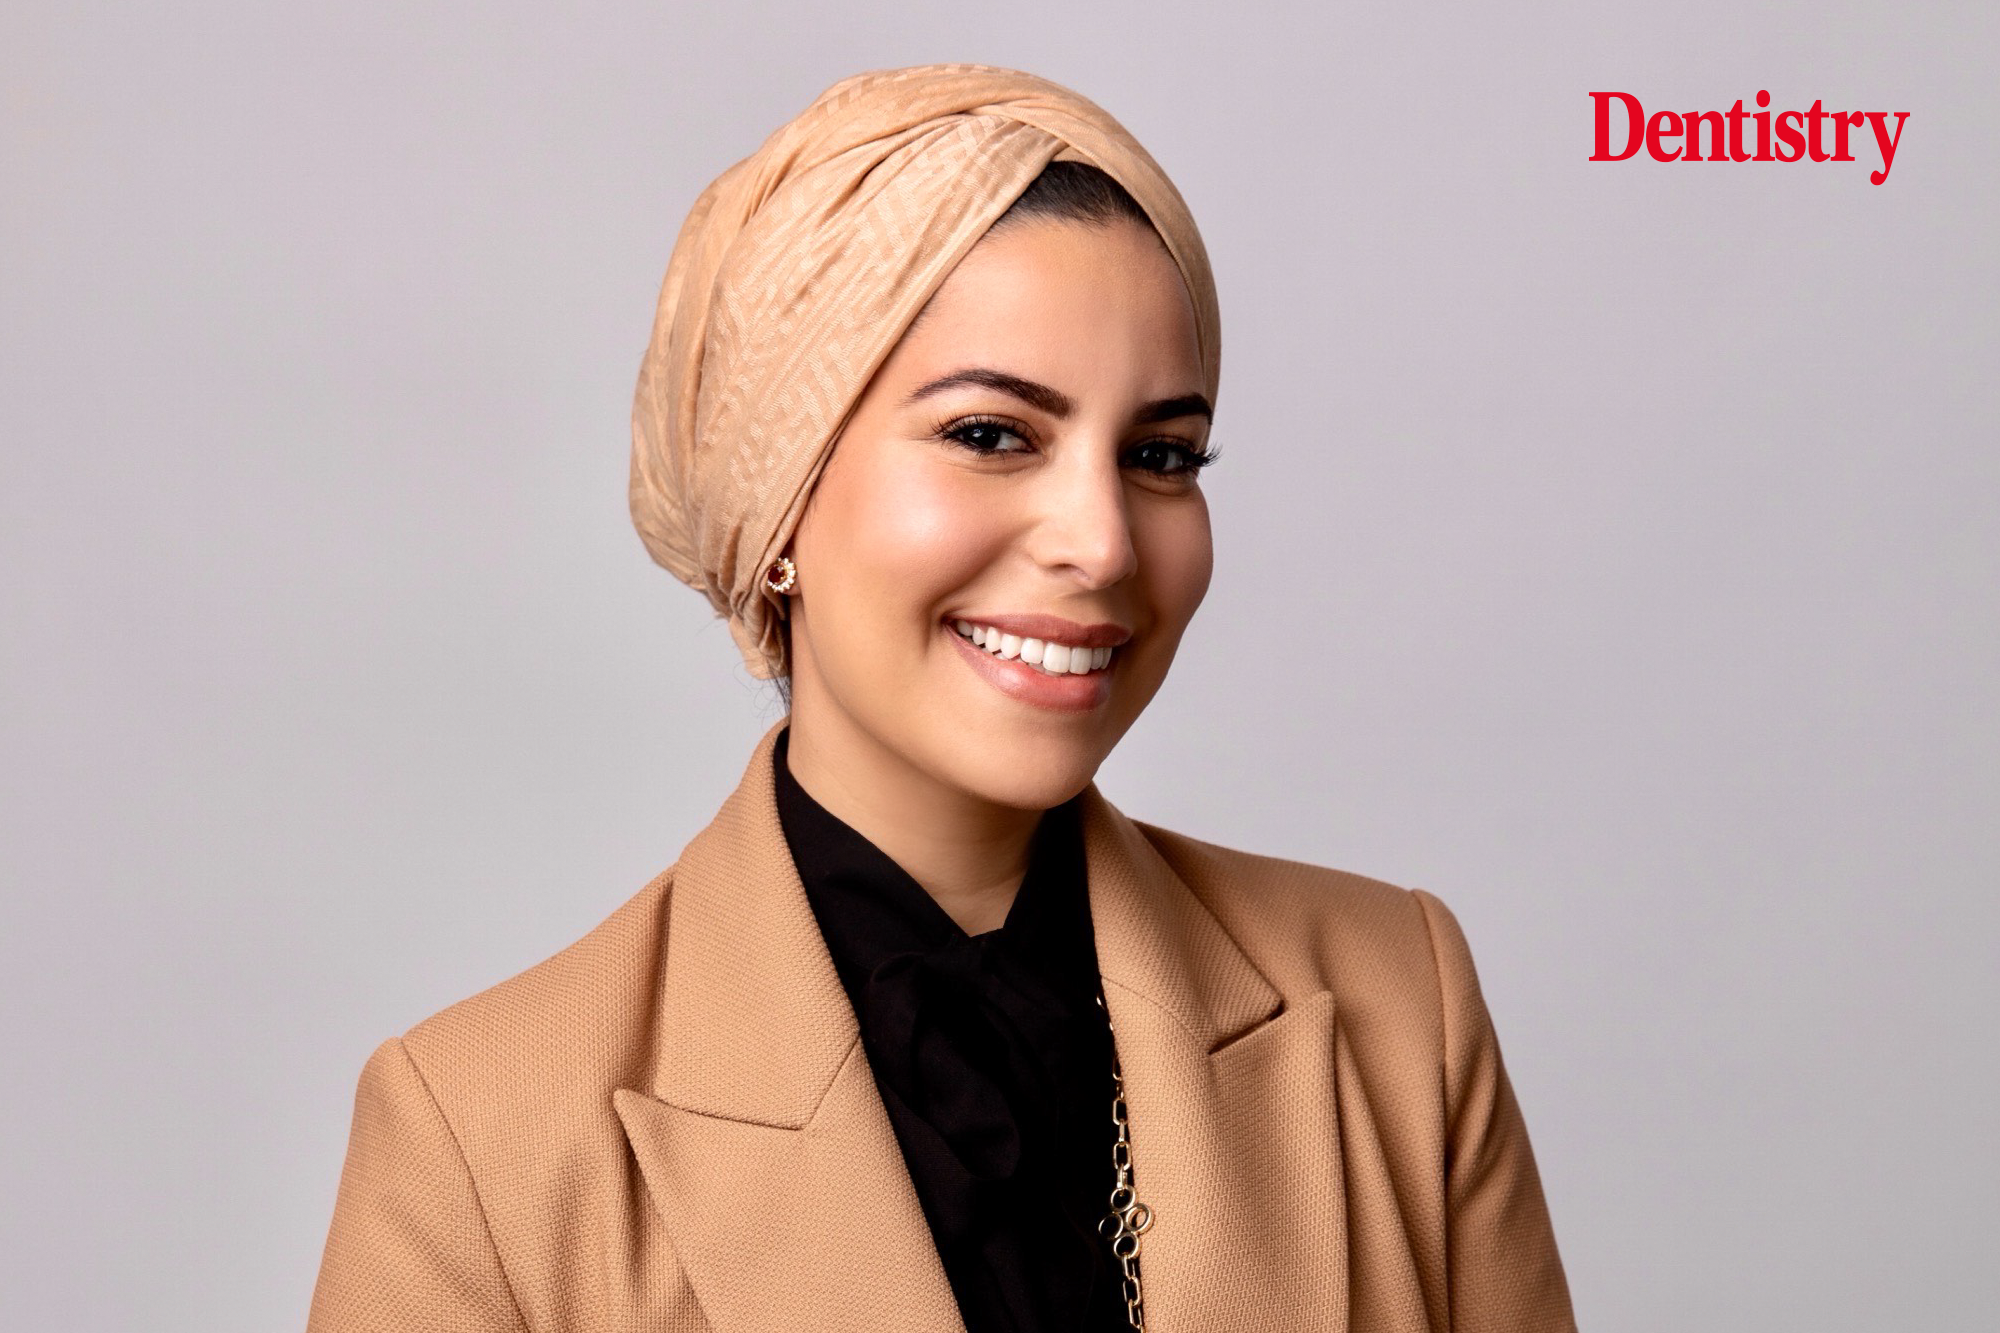 Sara Al-Naher, owner of Twoth Dental and Facial Aesthetics